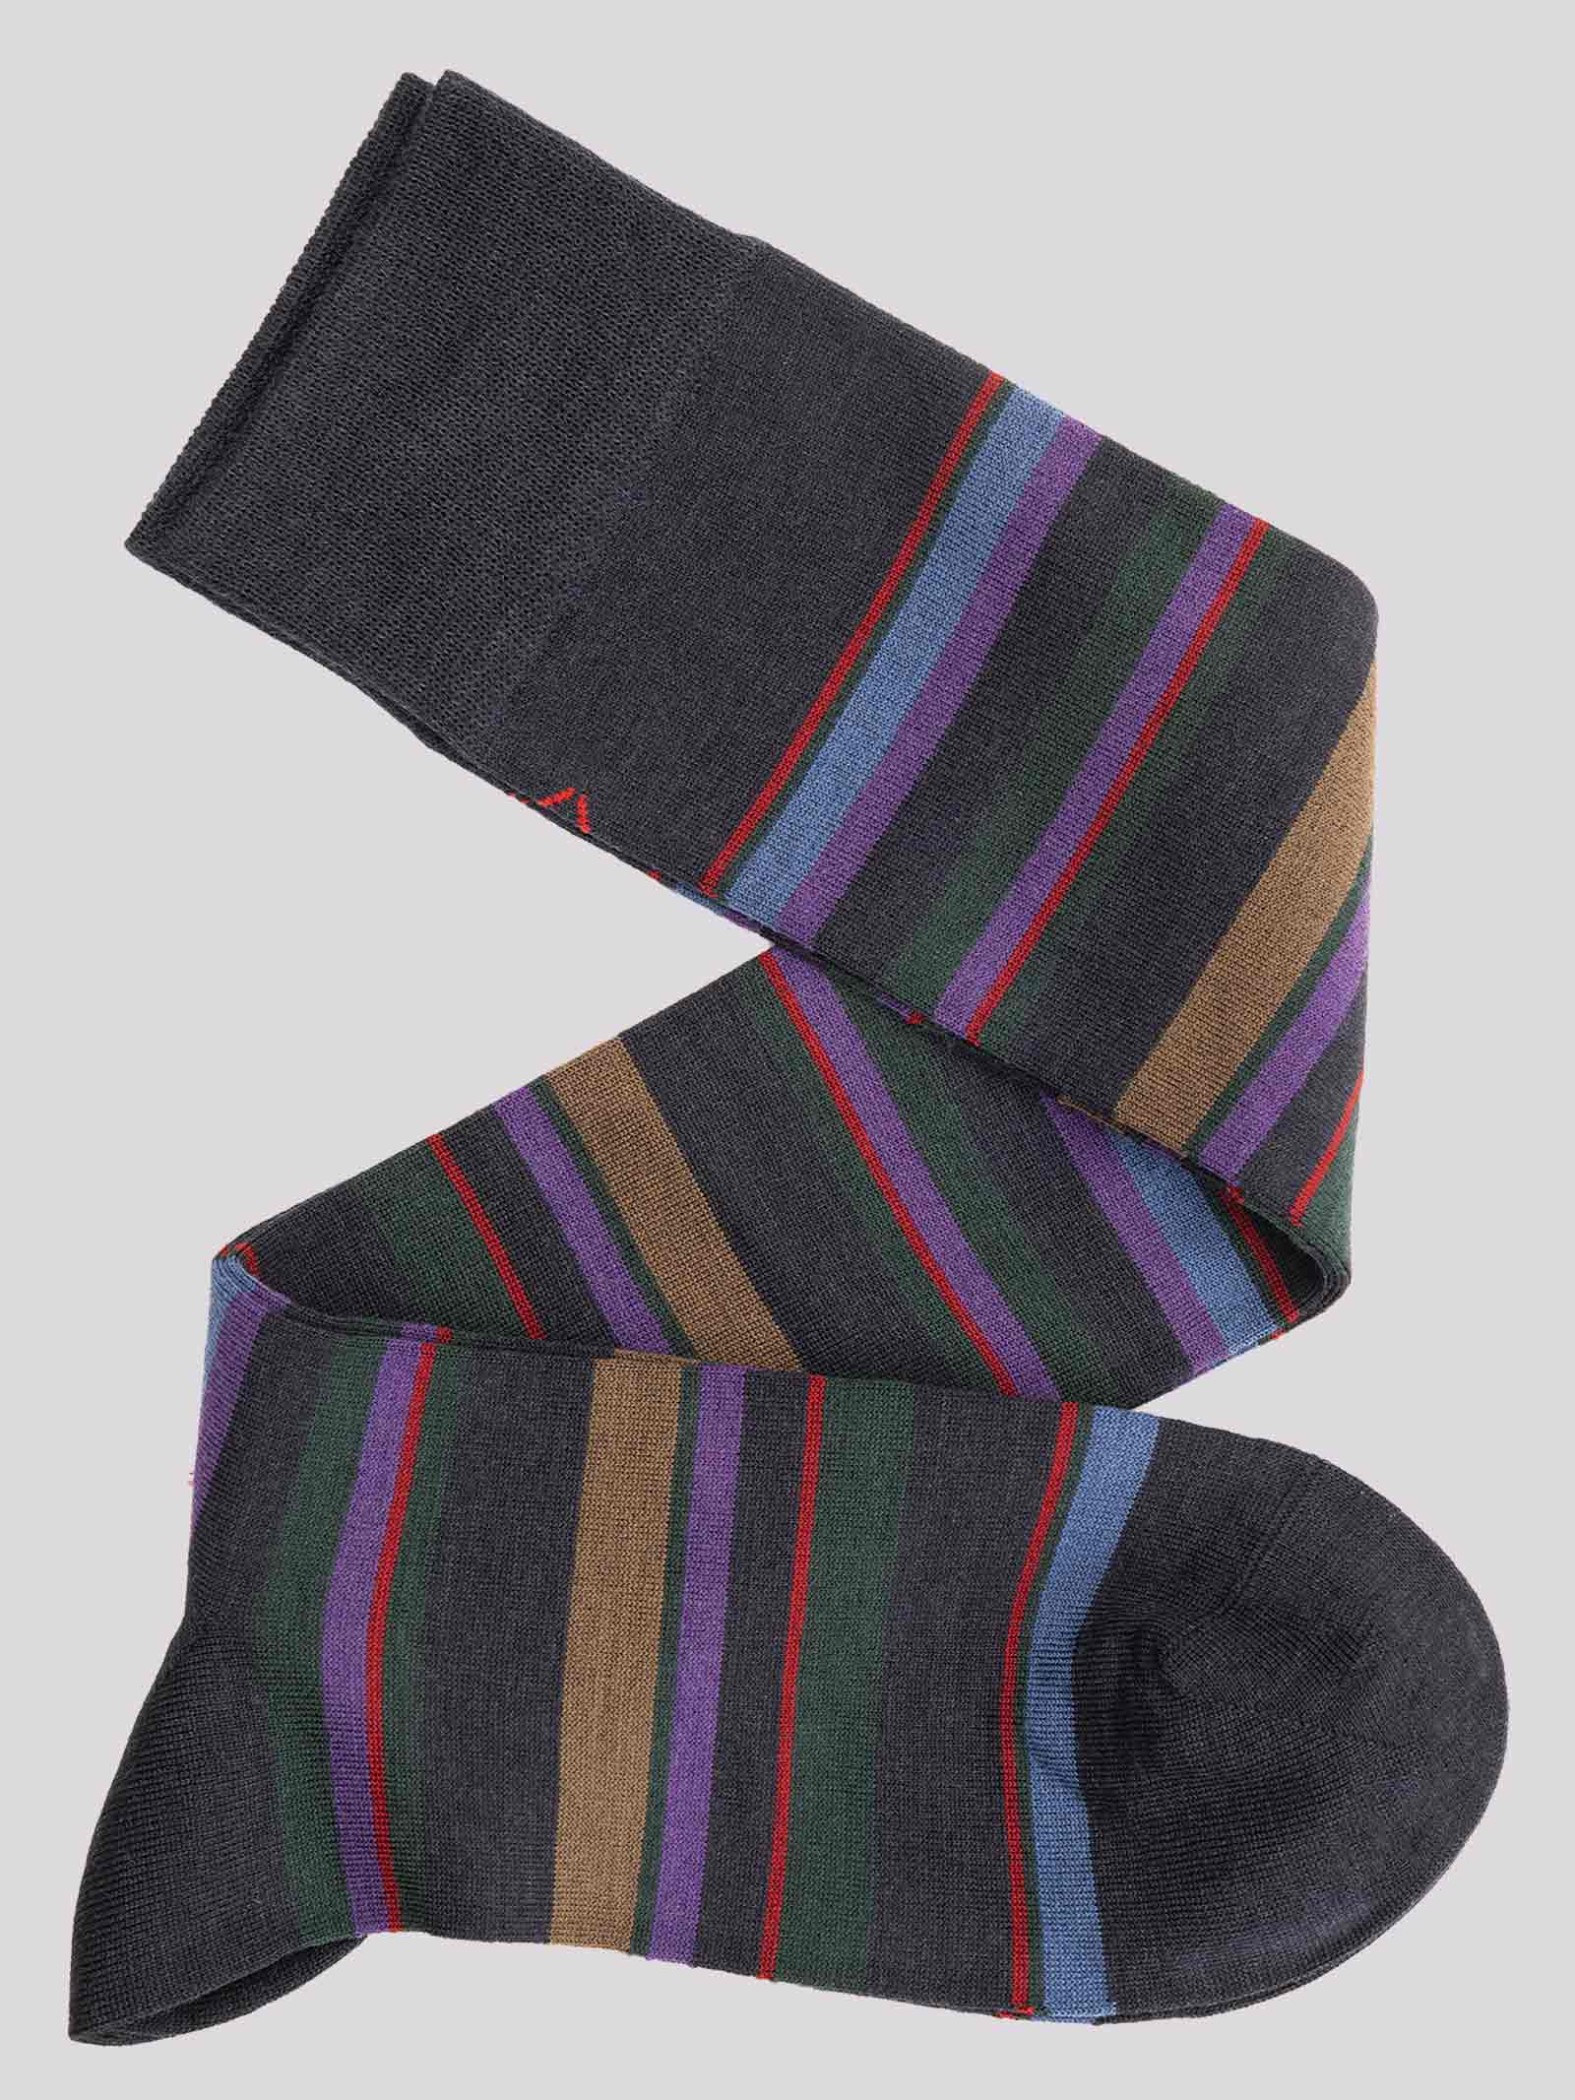 Men's knee high socks with stripes and bands in warm cotton